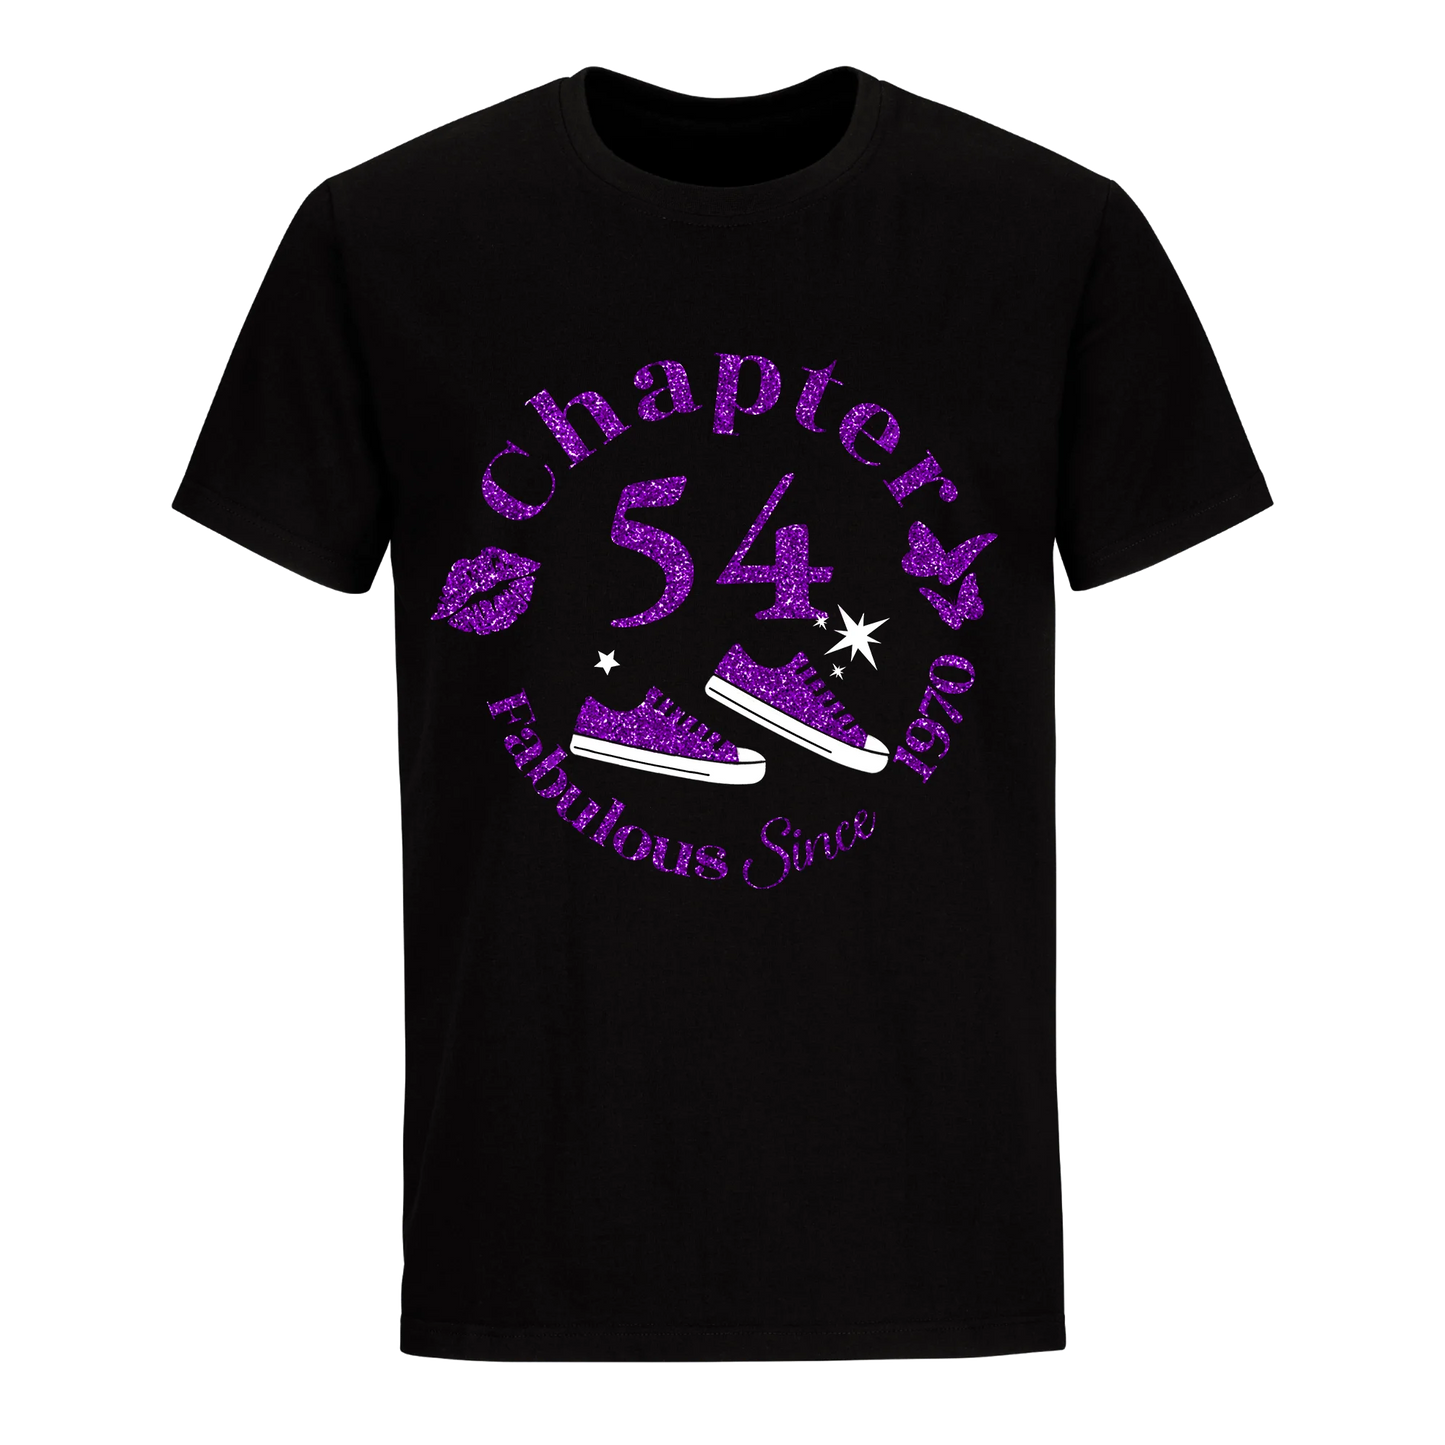 CHAPTER 54TH FAB SINCE 1970 UNISEX SHIRT